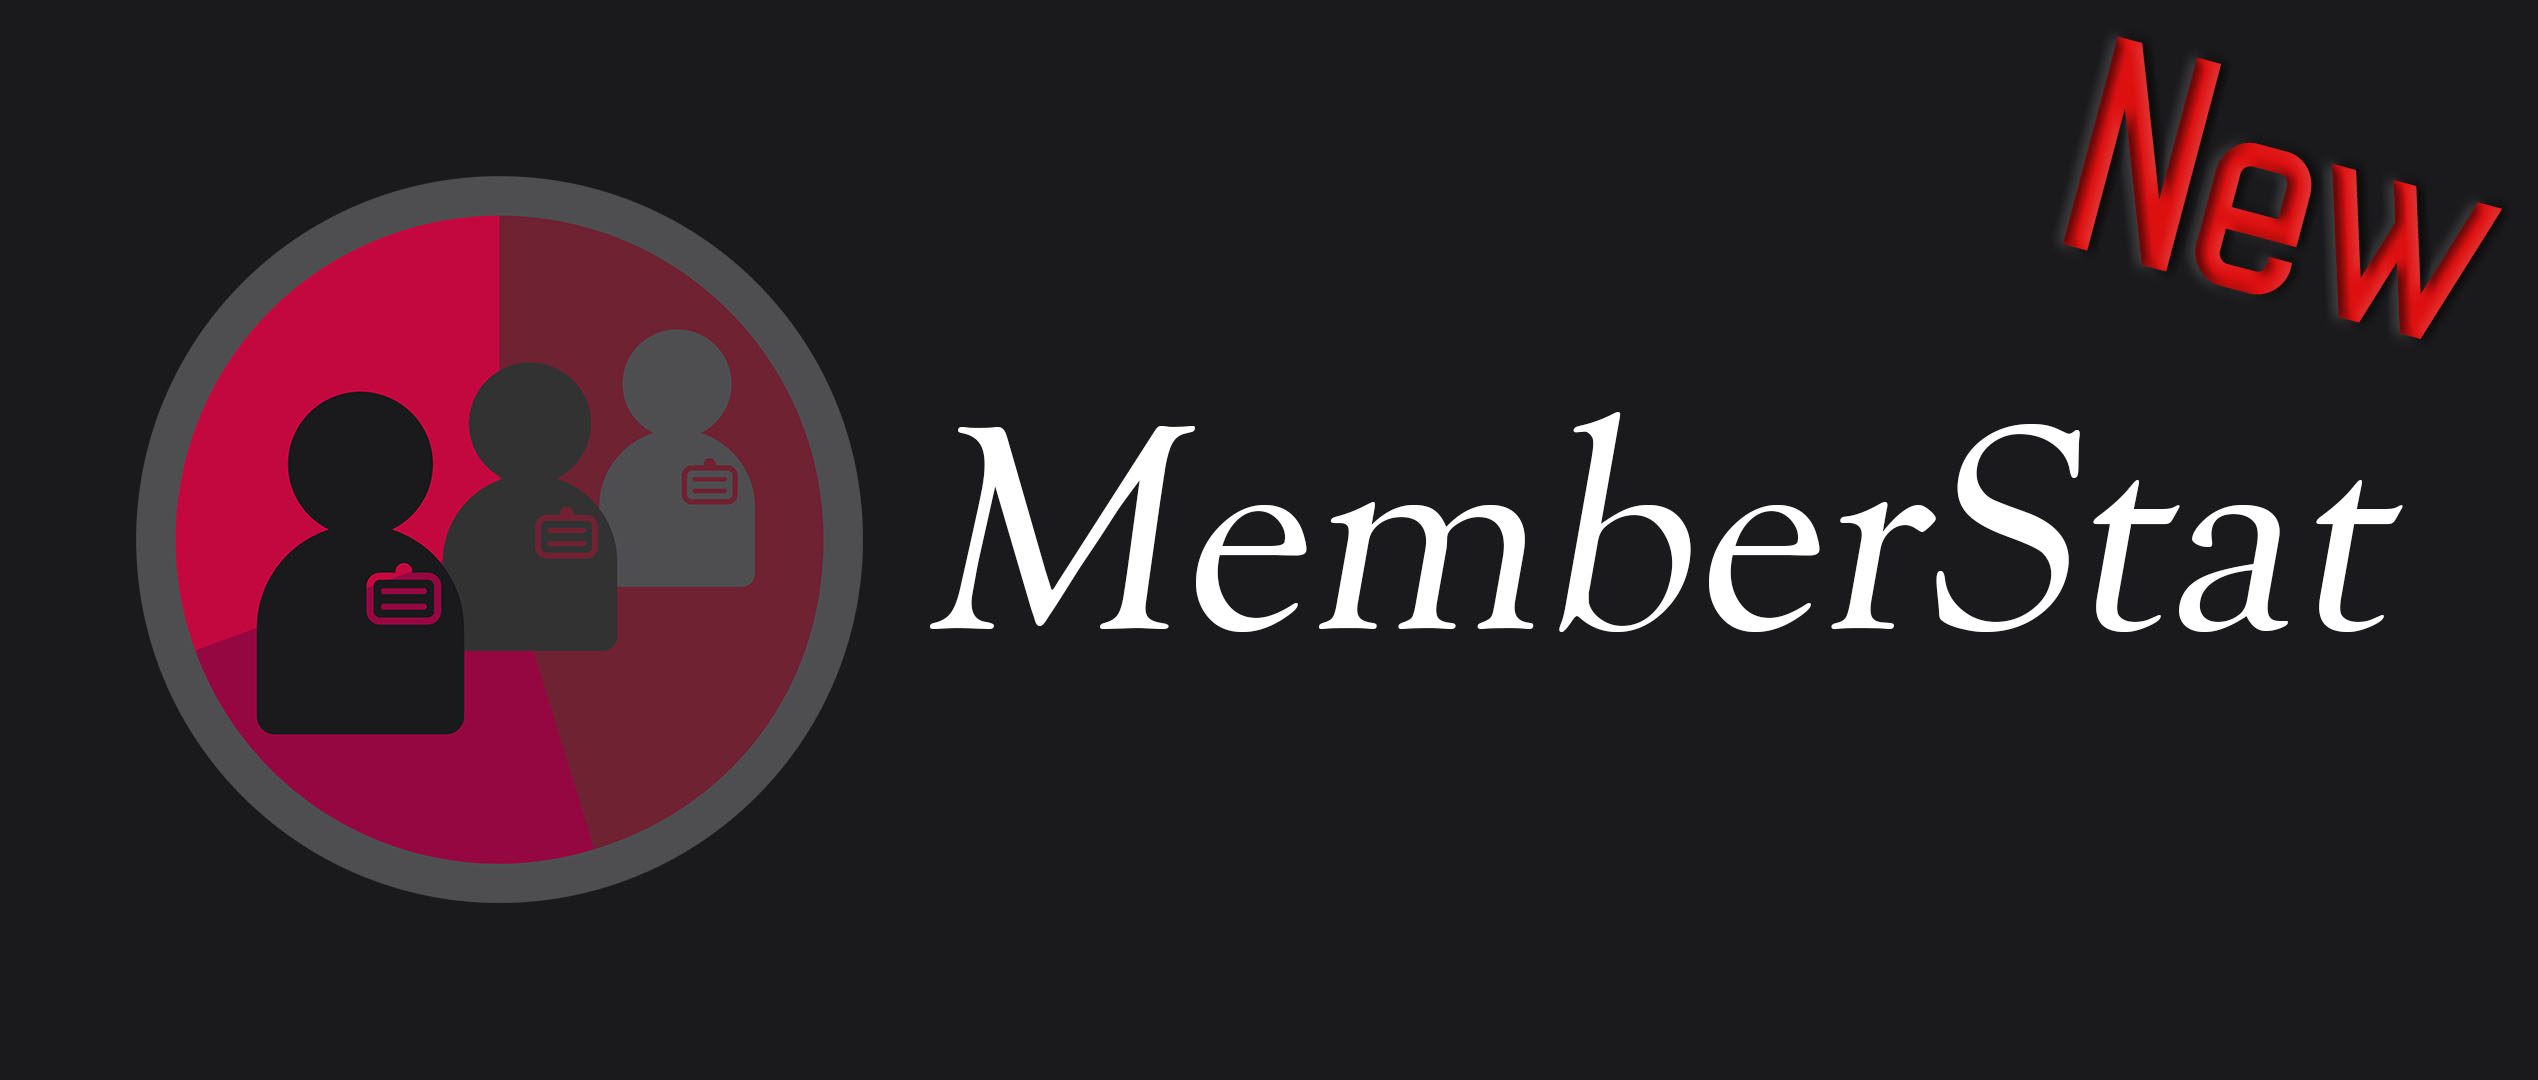 Manage your members with MemberStat